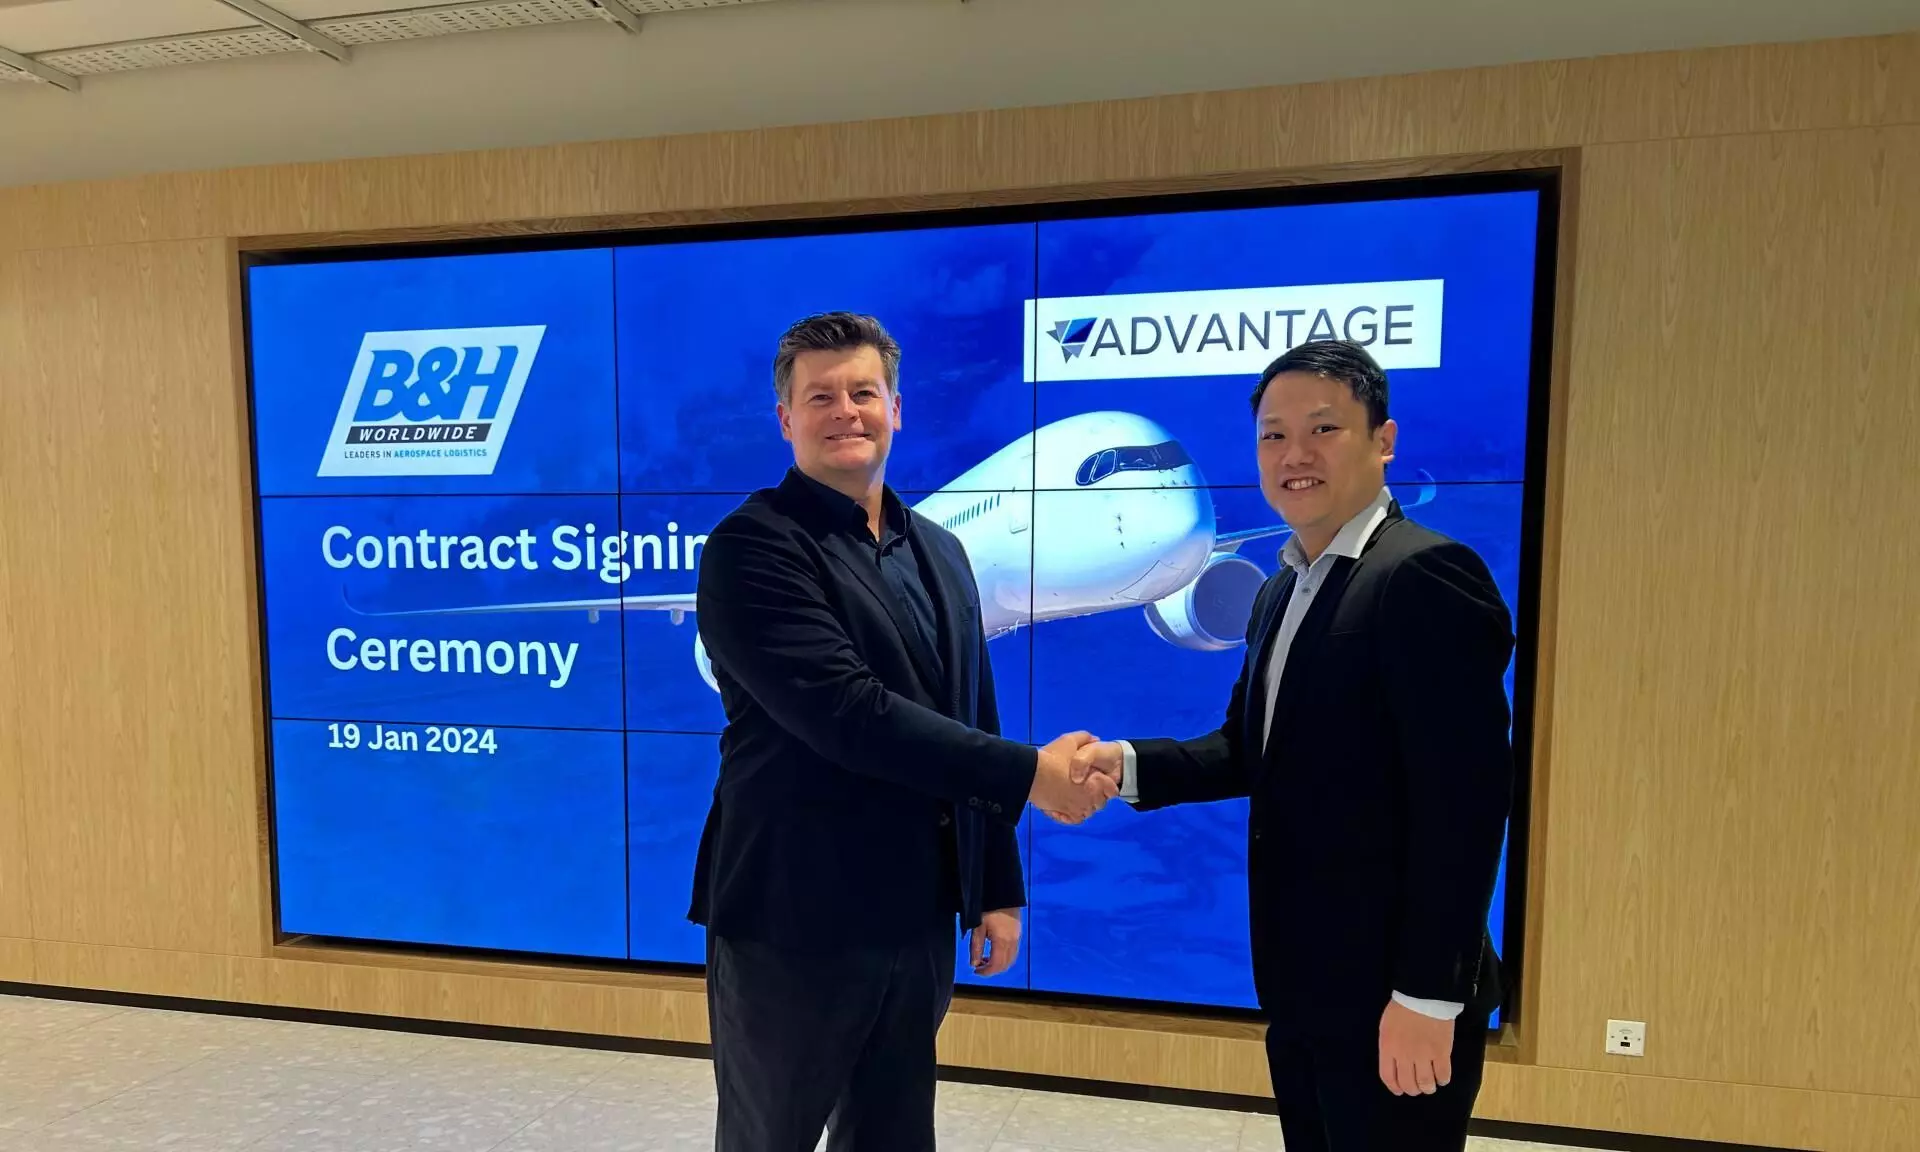 B&H Worldwide signs three year deal with Advantage Future Tech in US